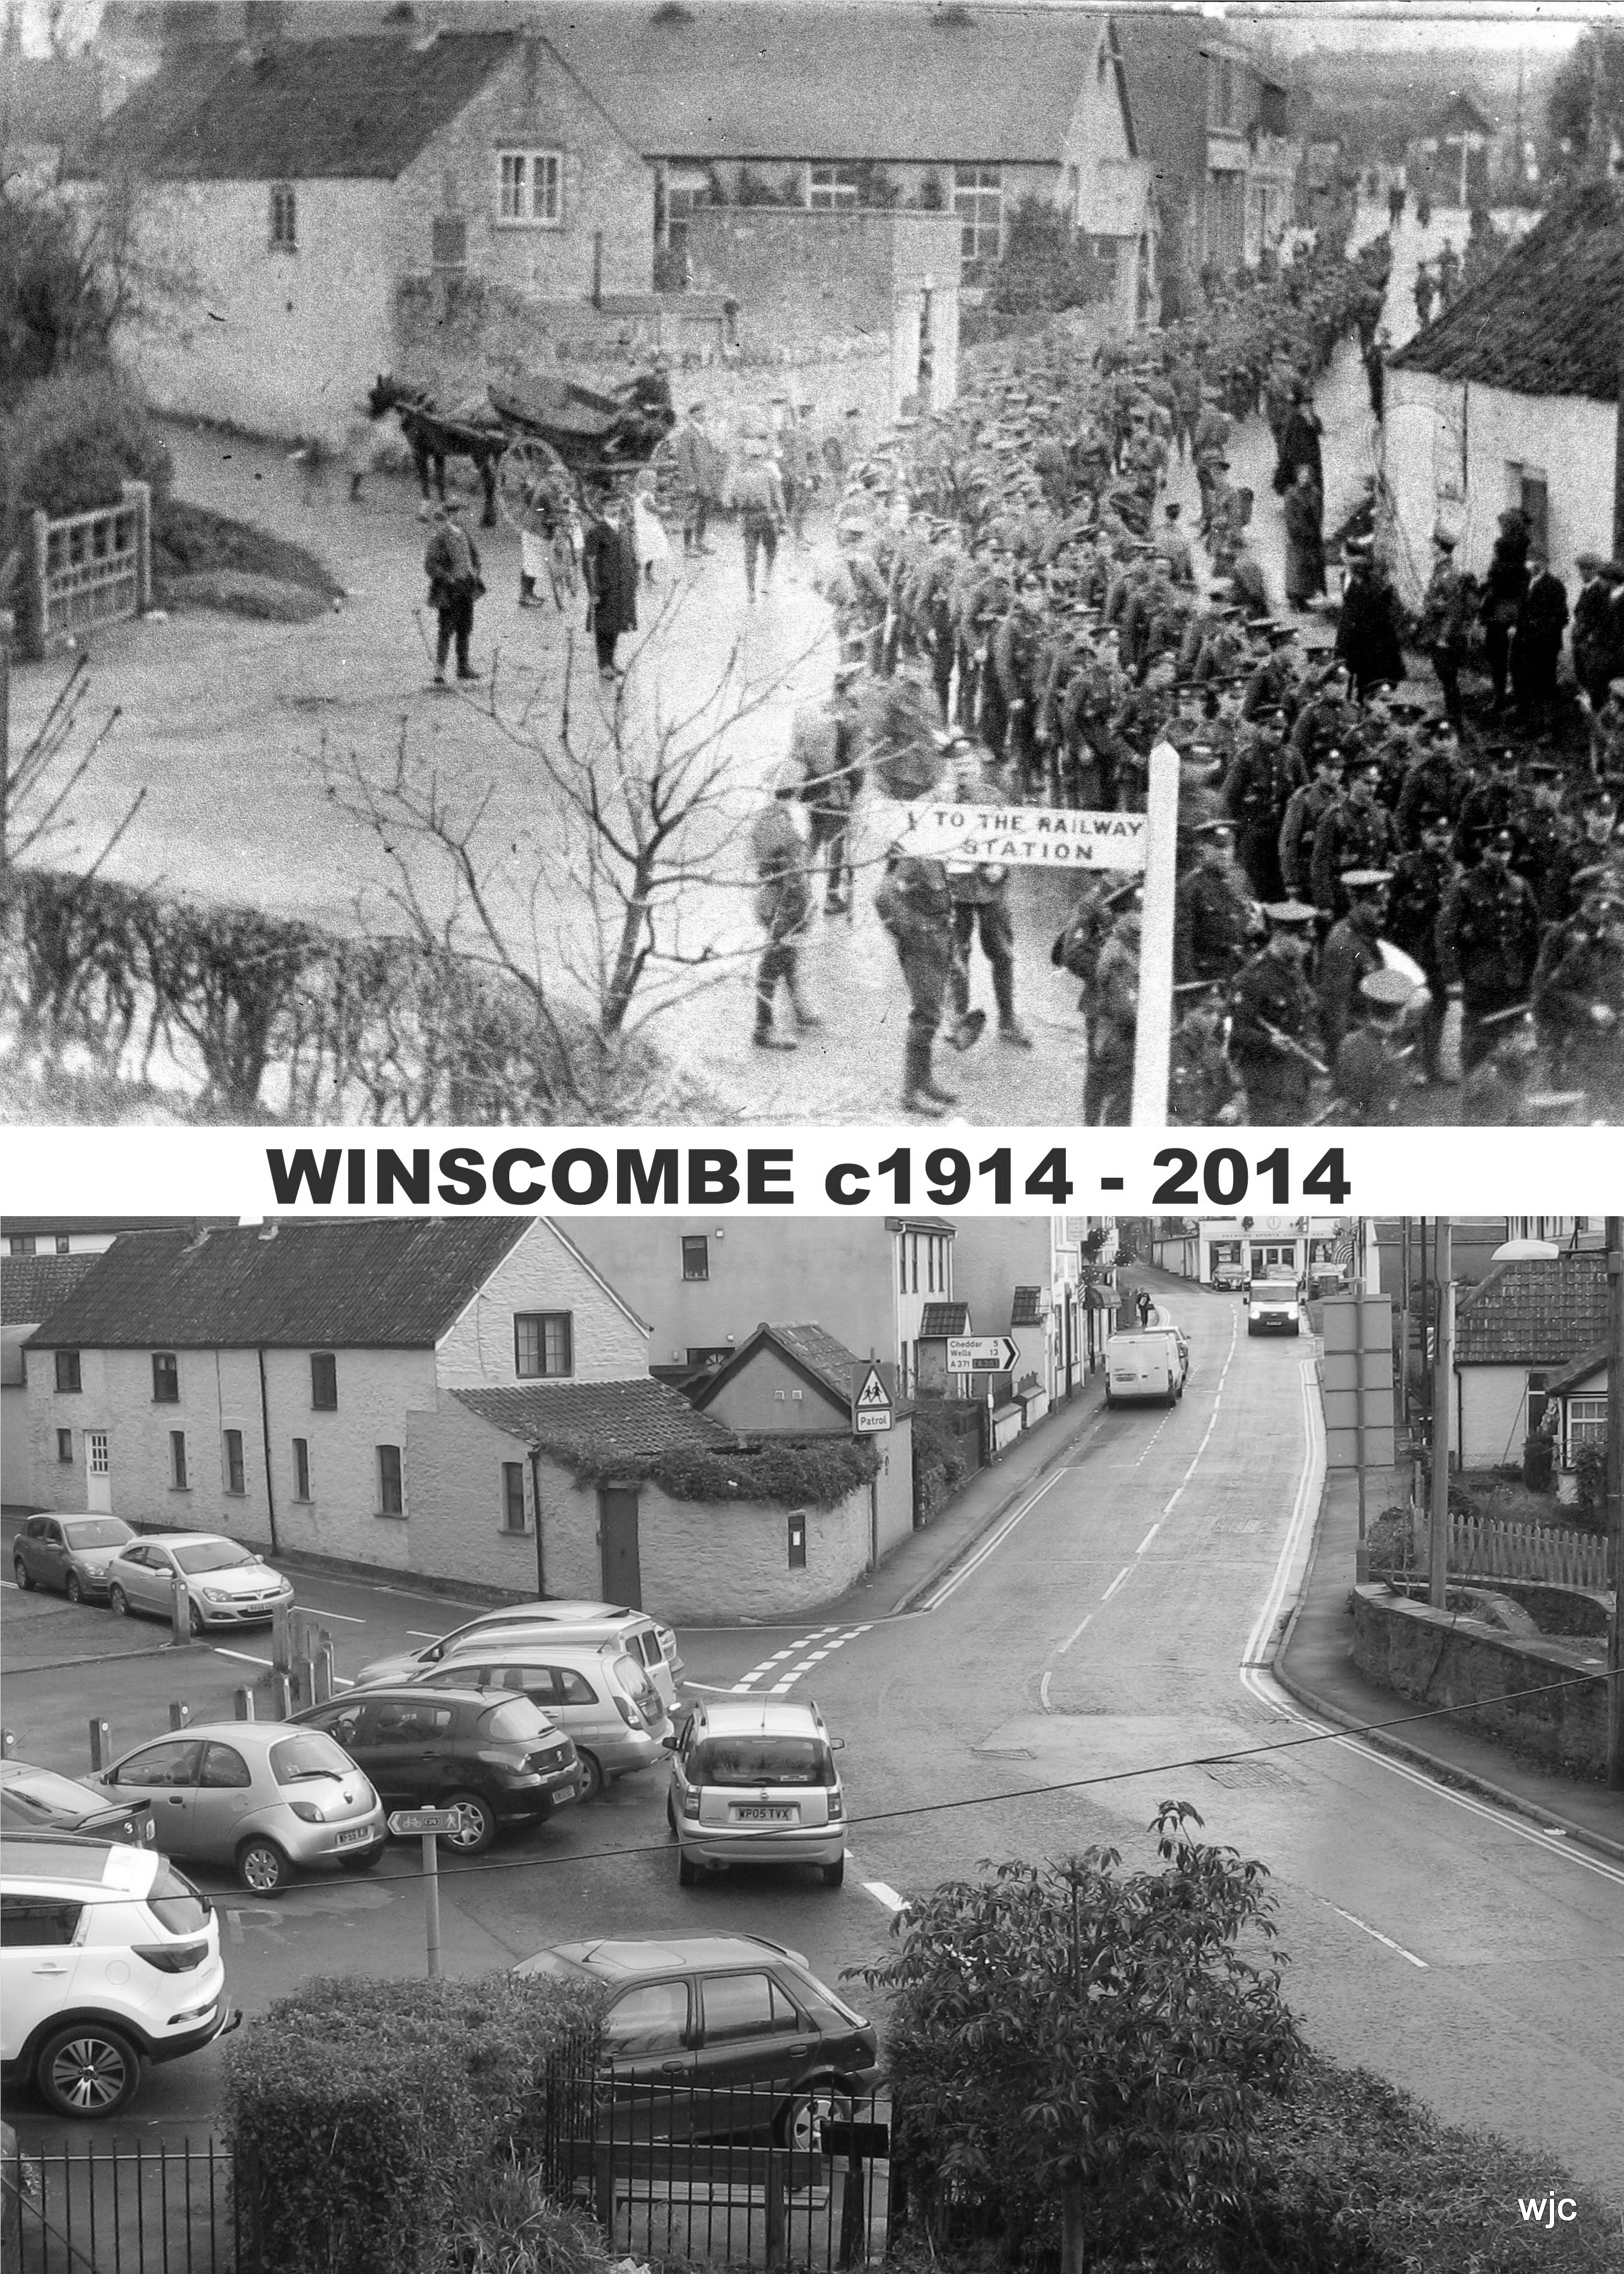 Station rd. Winscombe